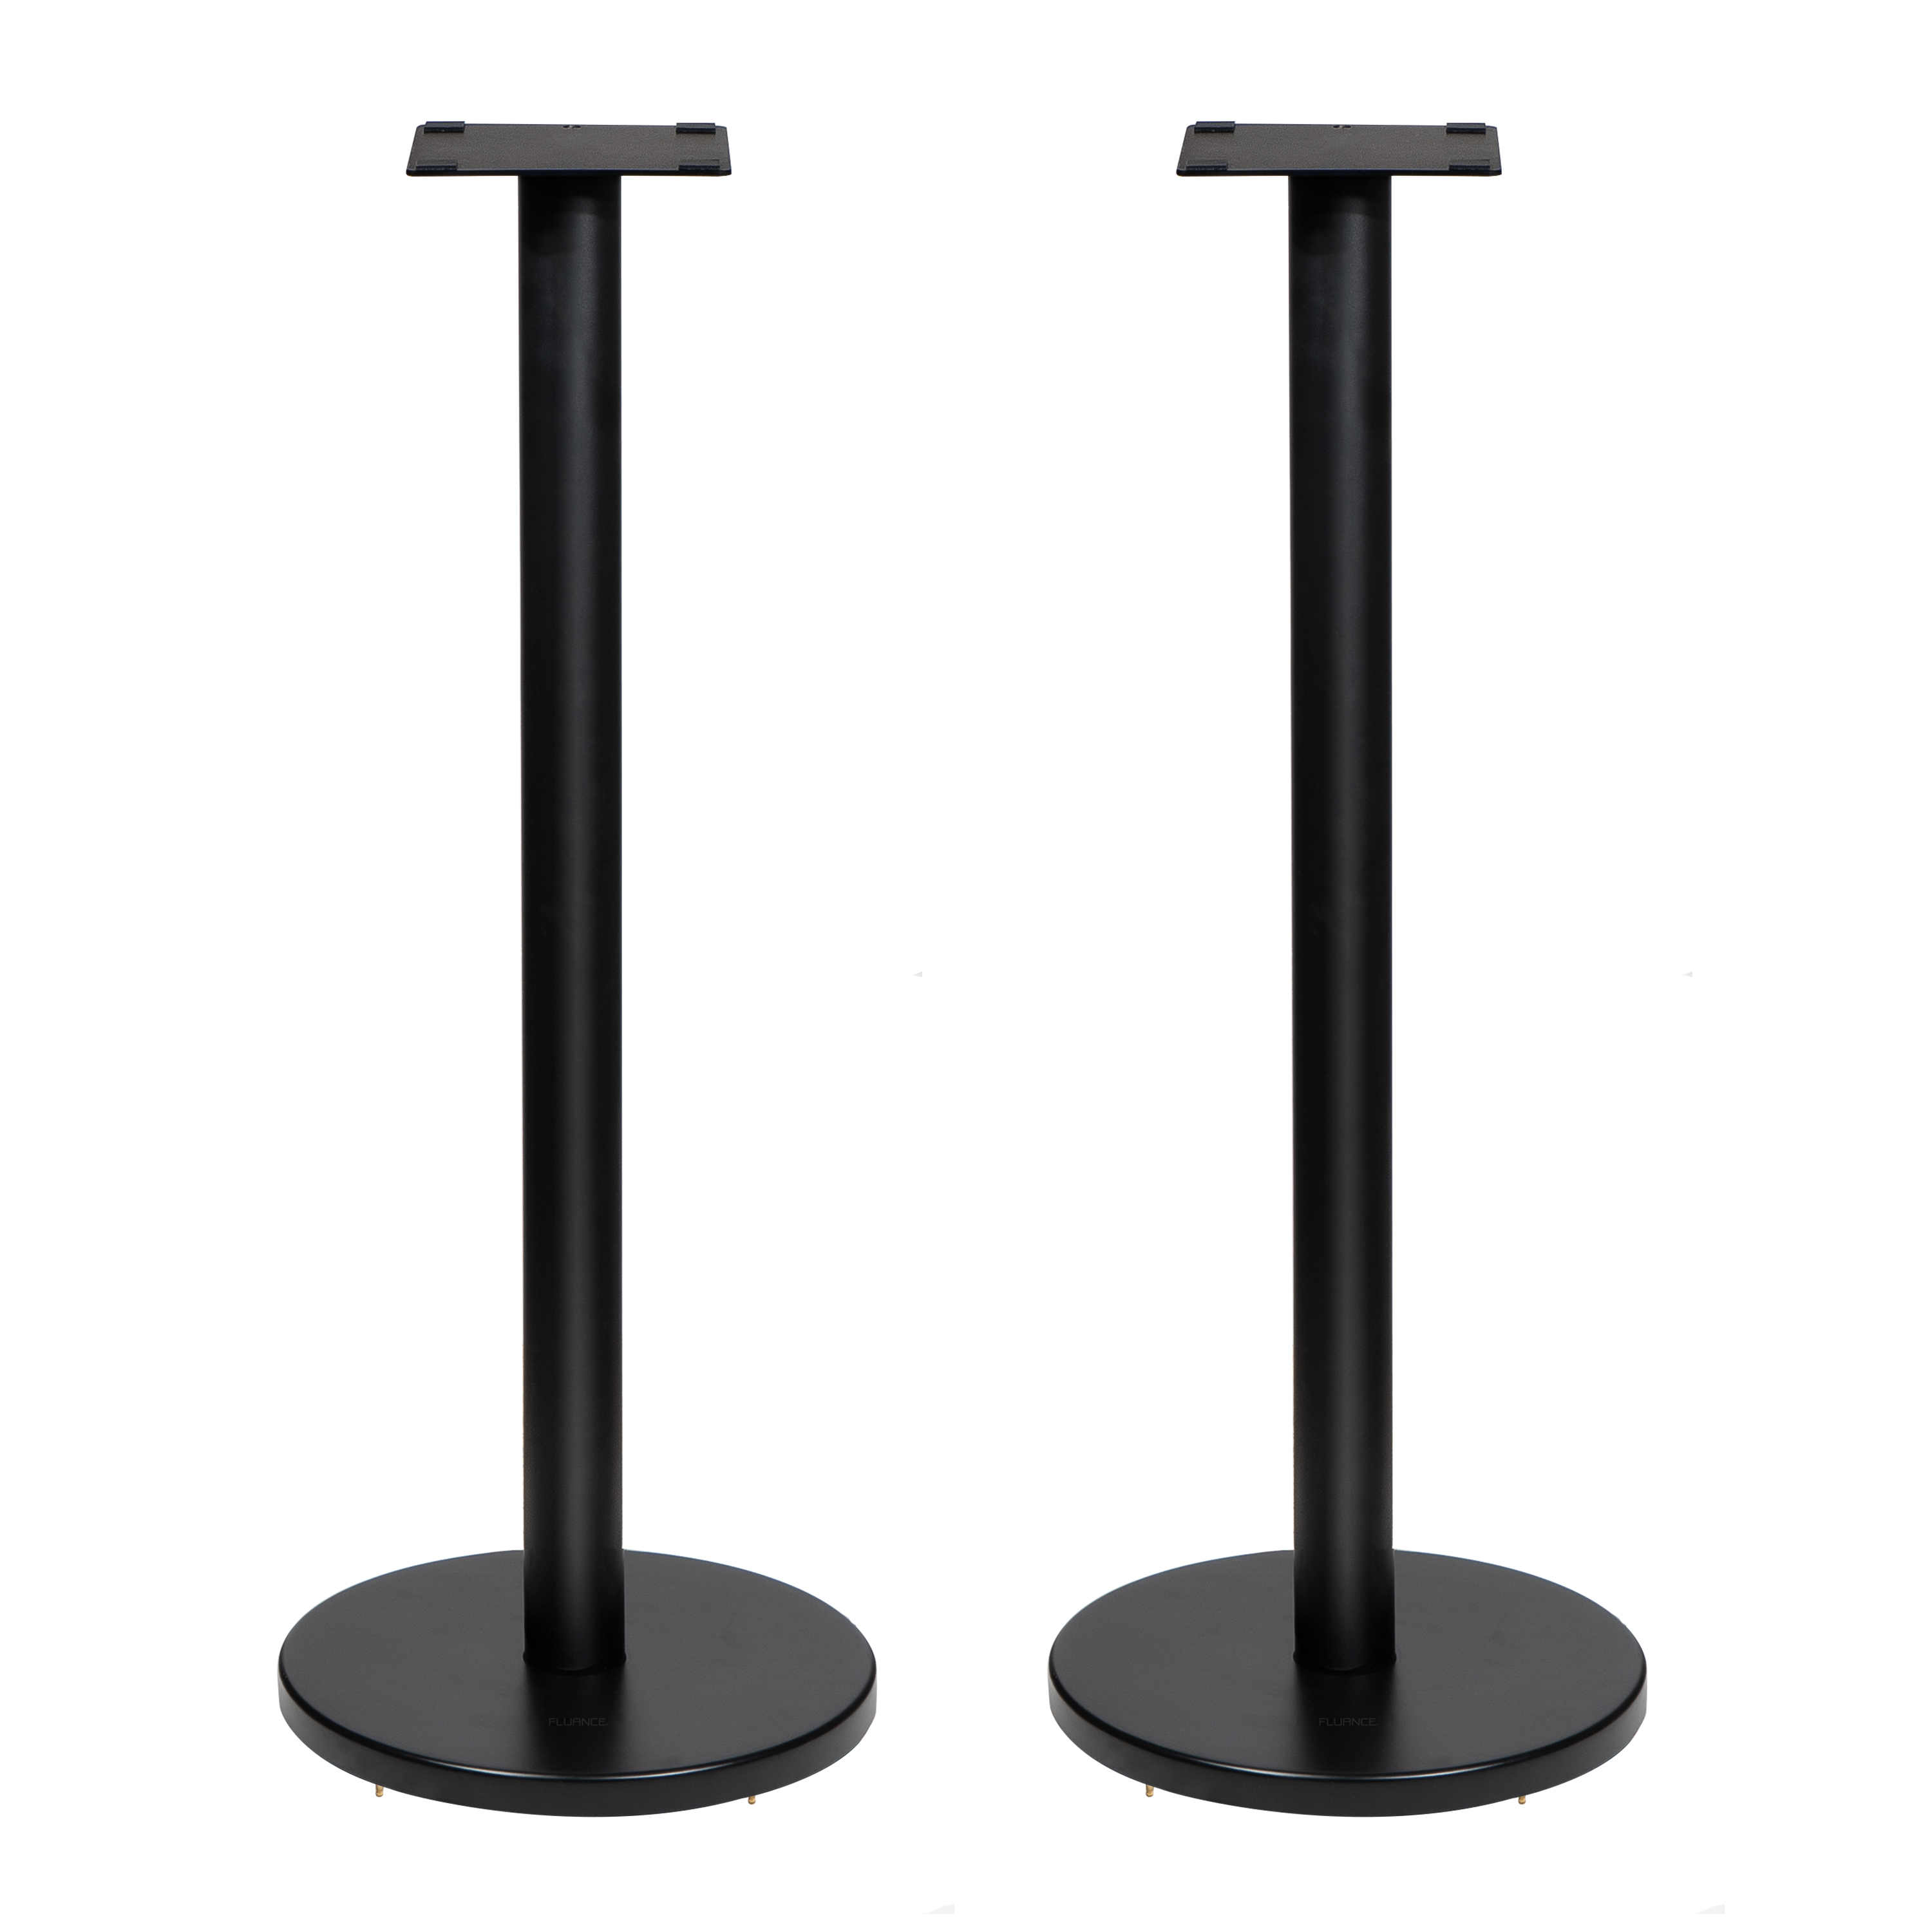 Fluance Speaker Stands for Surround Sound and Bookshelf Speakers Round Base/Pair - image 1 of 9